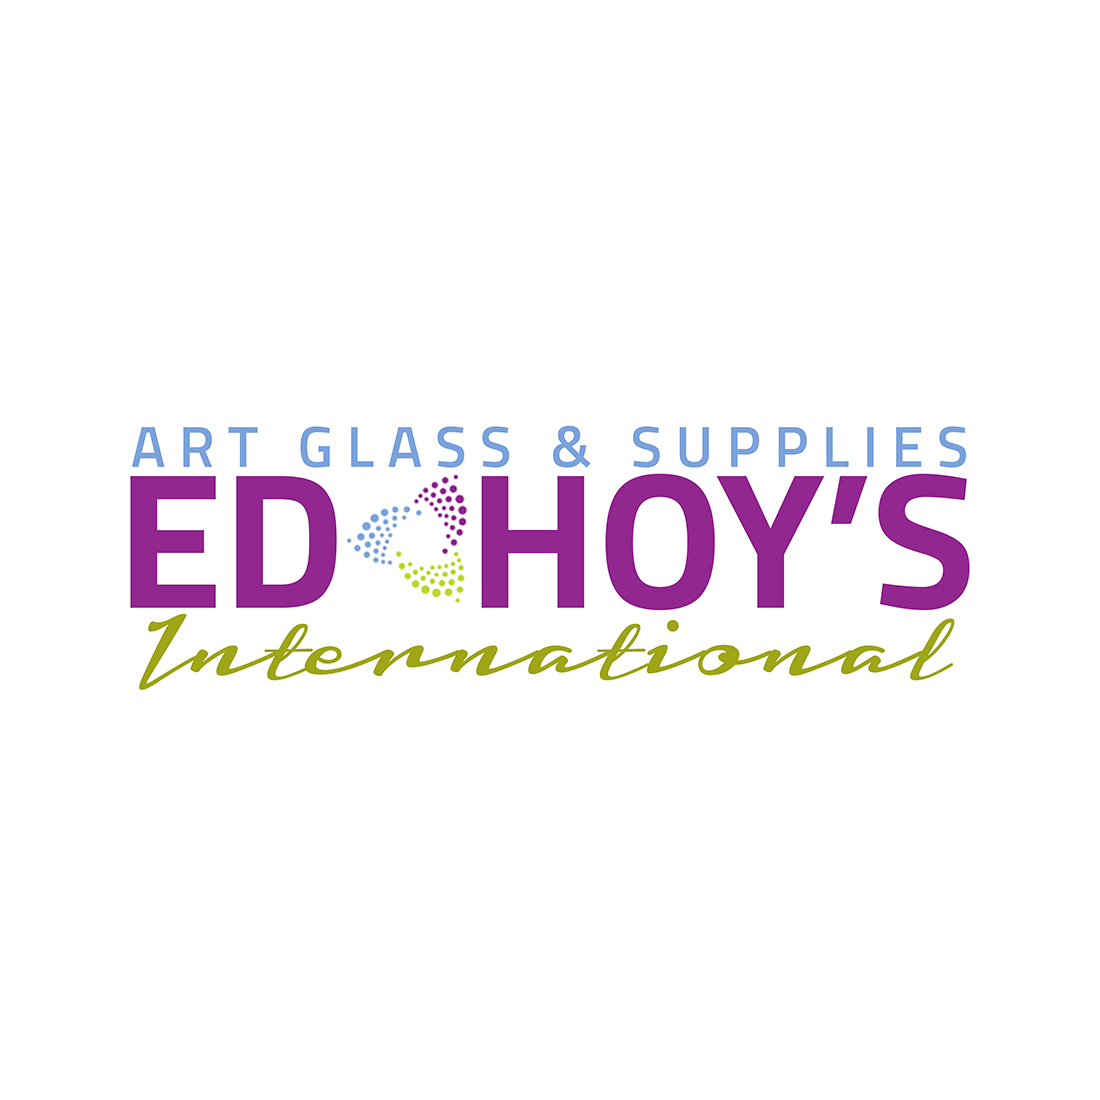 What Are The Uses of Dichroic Glass - ArtGlassSupplies